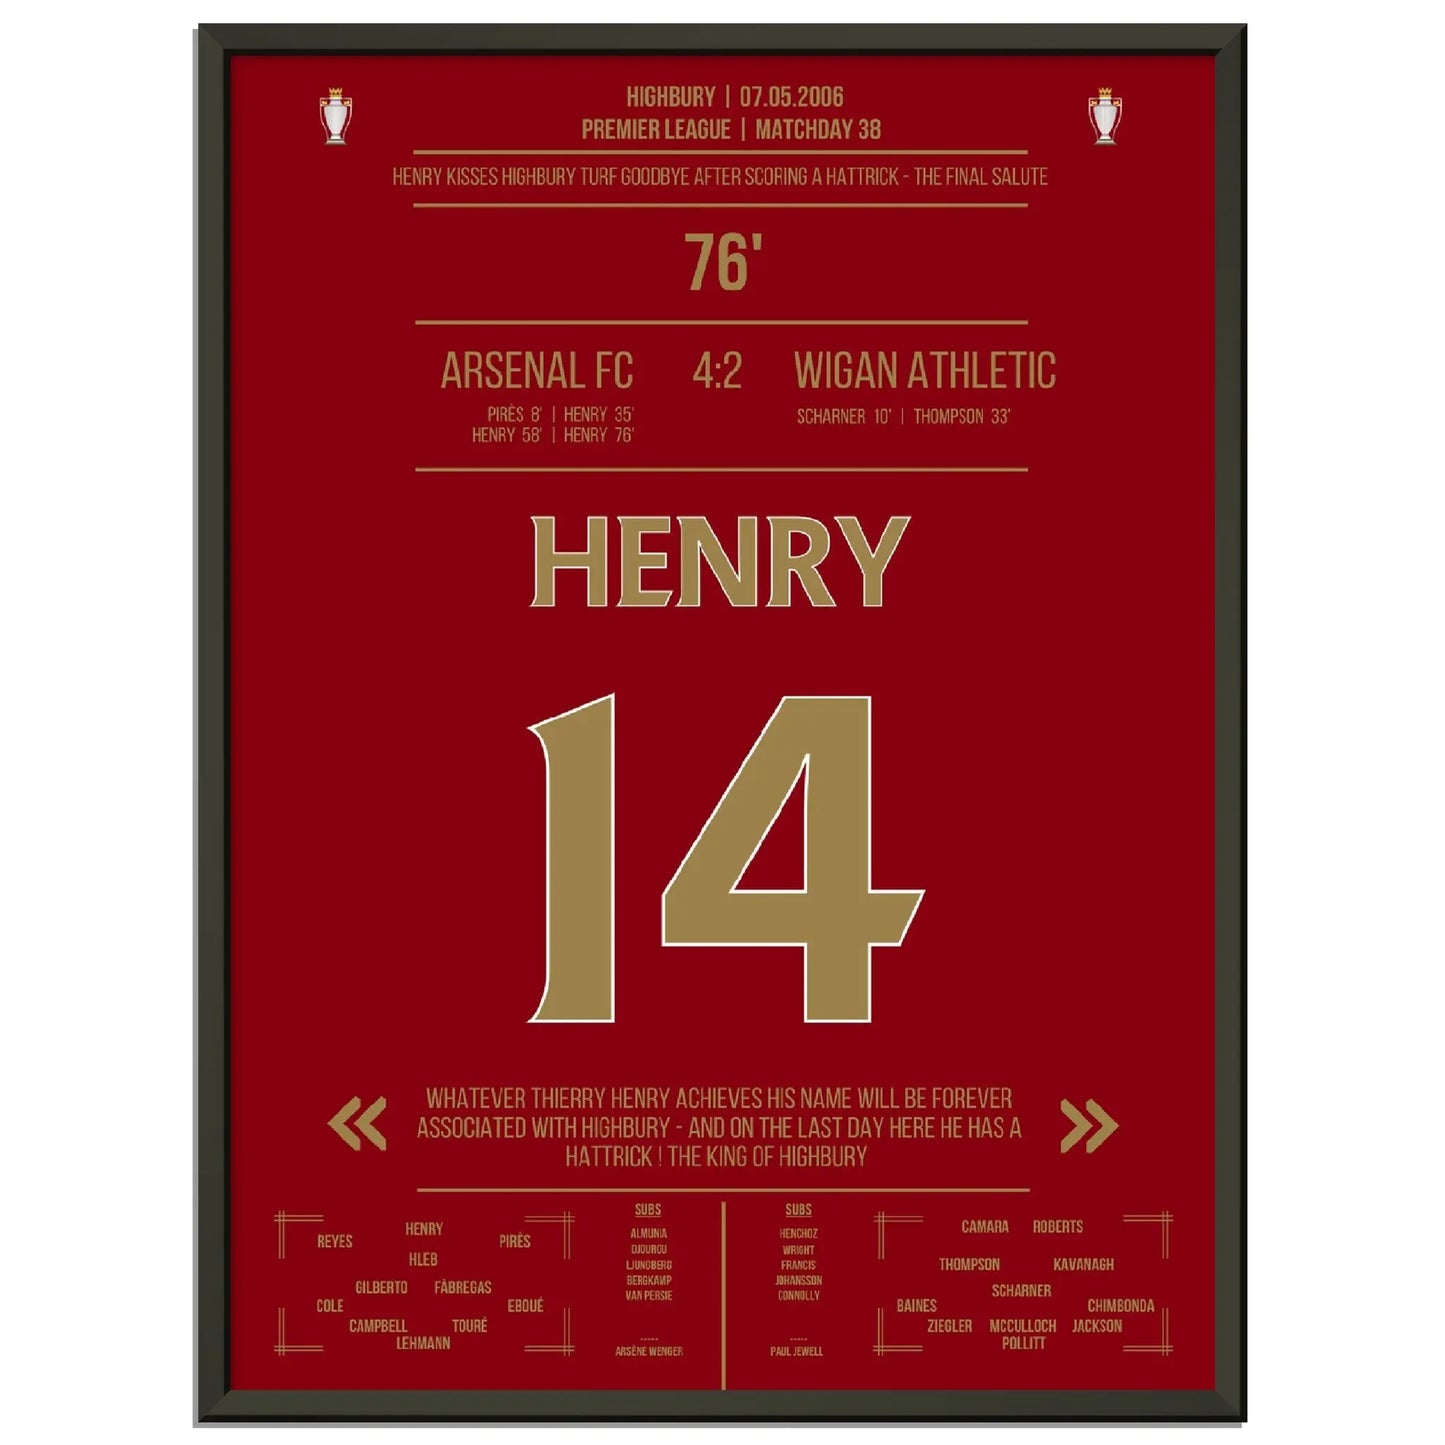 Thierry Henry Hattrick Last Game At Highbury Arsenal - Wigan - The Final Salute 